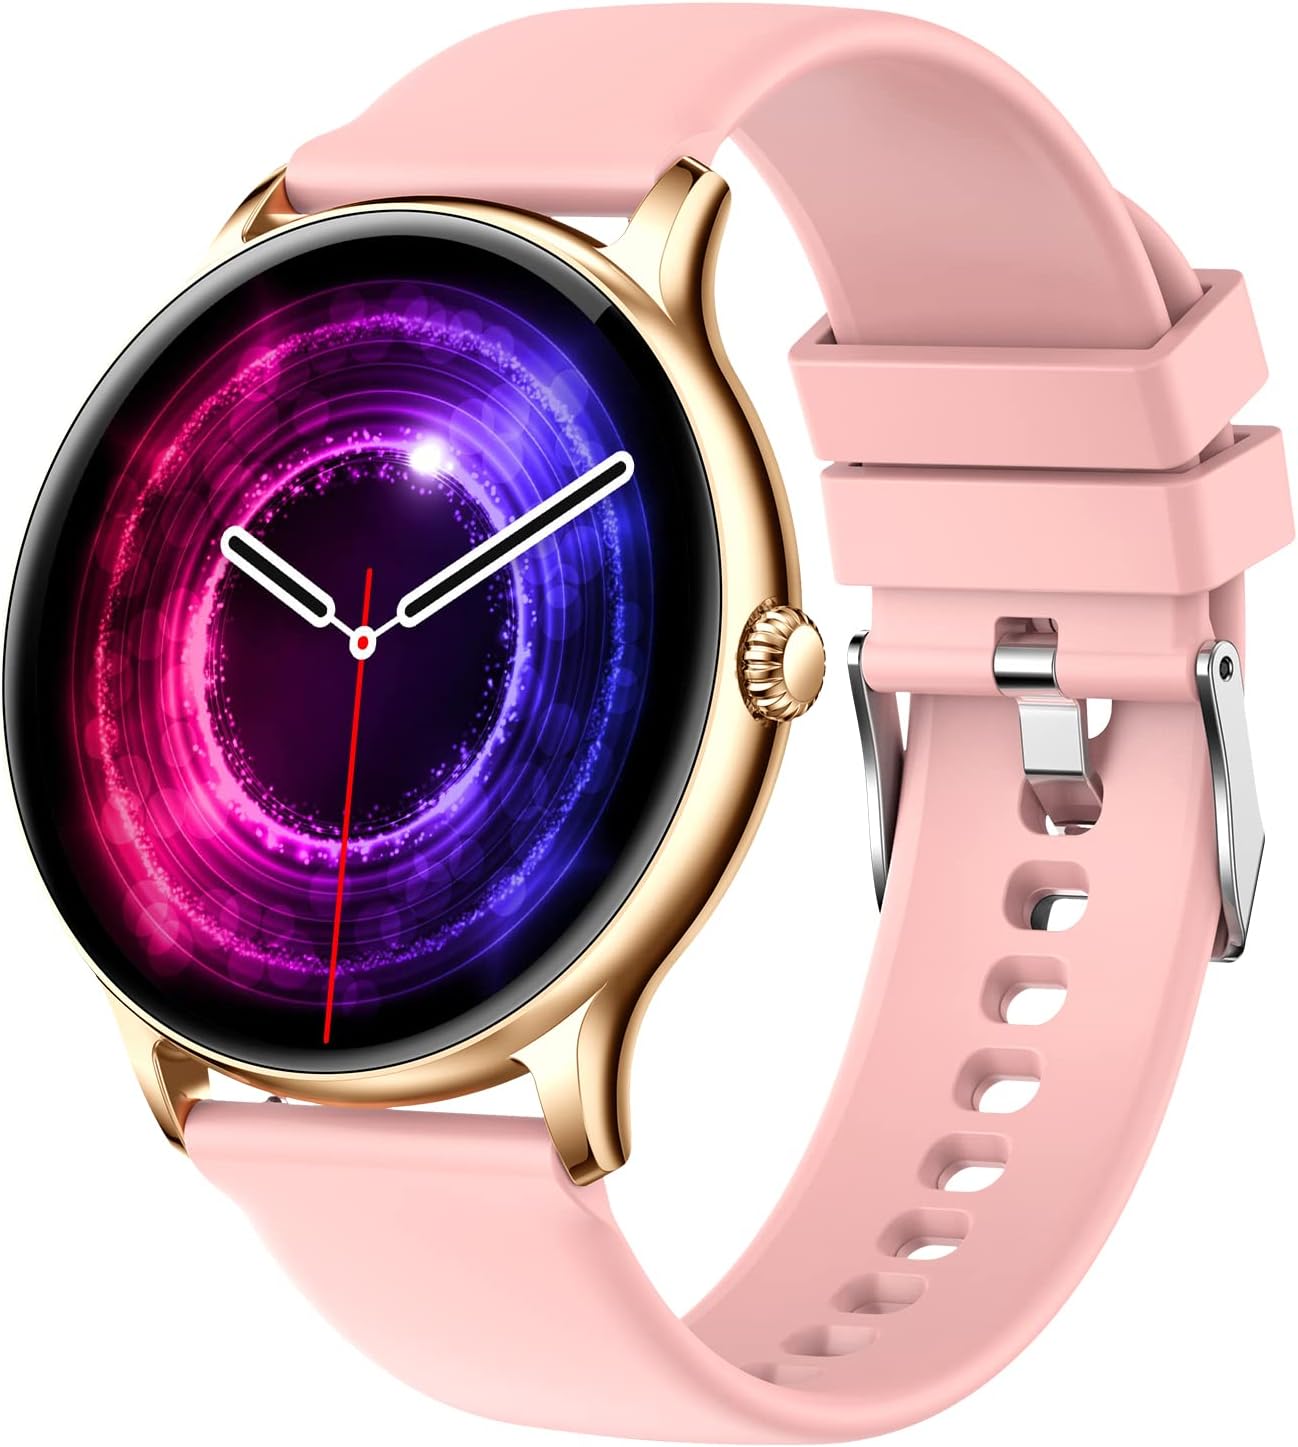 Fire-Boltt Phoenix Smart Watch with Bluetooth Calling 1.3",120+ Sports Modes, 240 * 240 PX High Res with SpO2, Heart Rate Monitoring & IP67 Rating (Gold Pink)